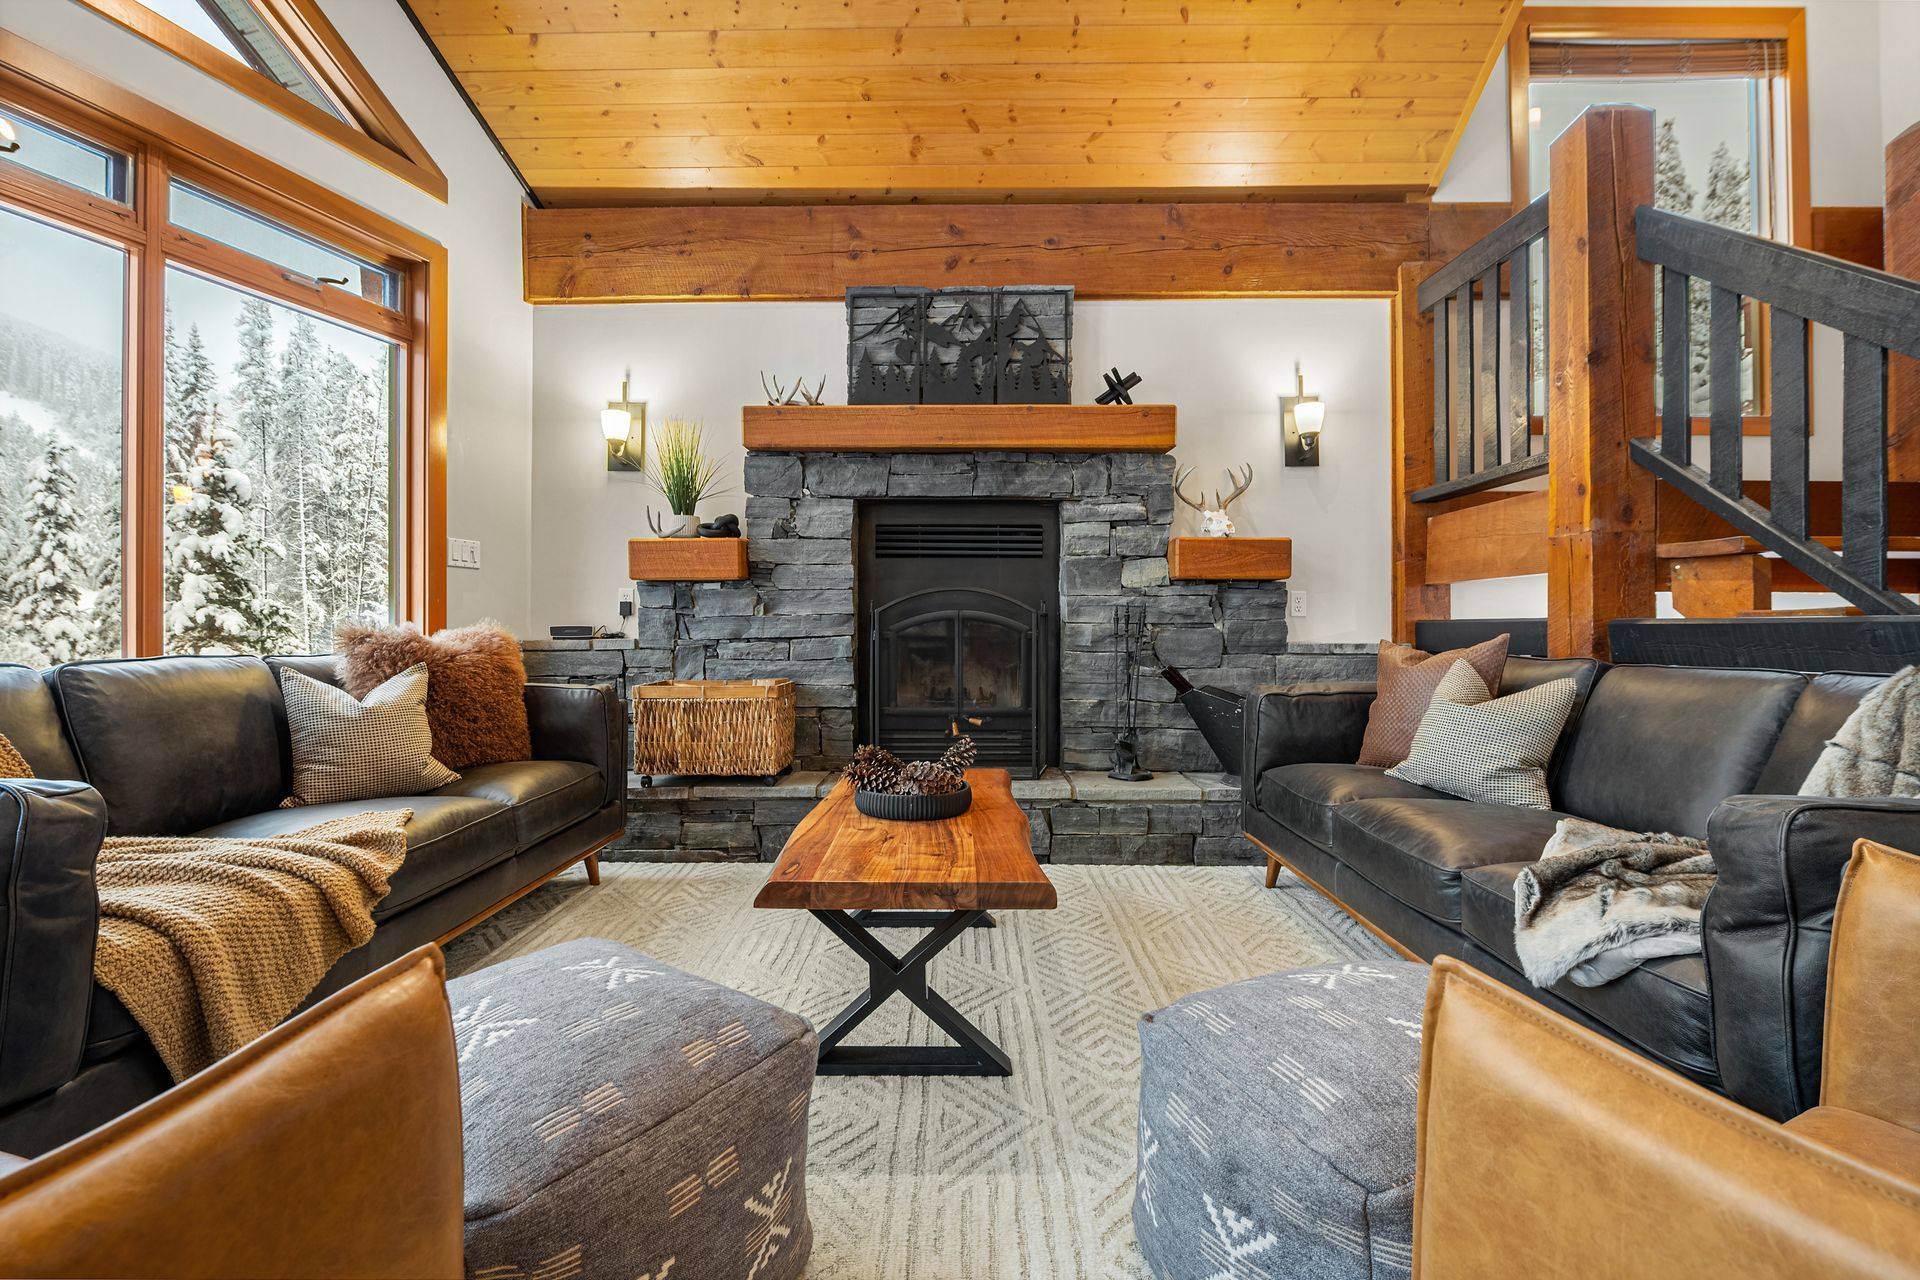 Living Room of the Greywolf Lodge,  a golf course BC vacation rental hosted by Aisling Baile Property Management.